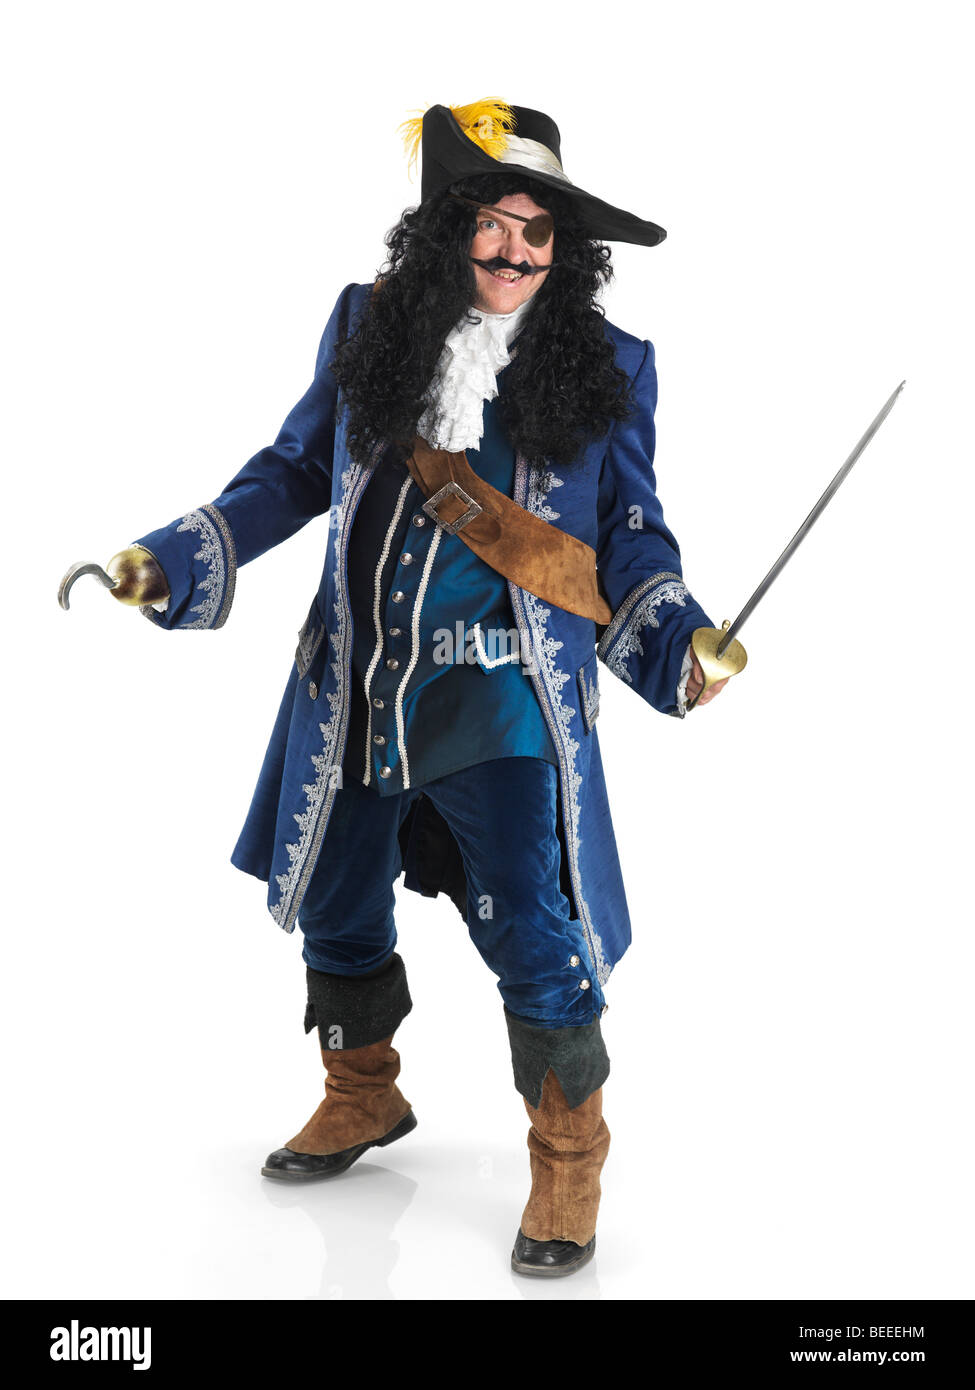 License available at MaximImages.com - Laughing pirate with a sword and a hook Stock Photo